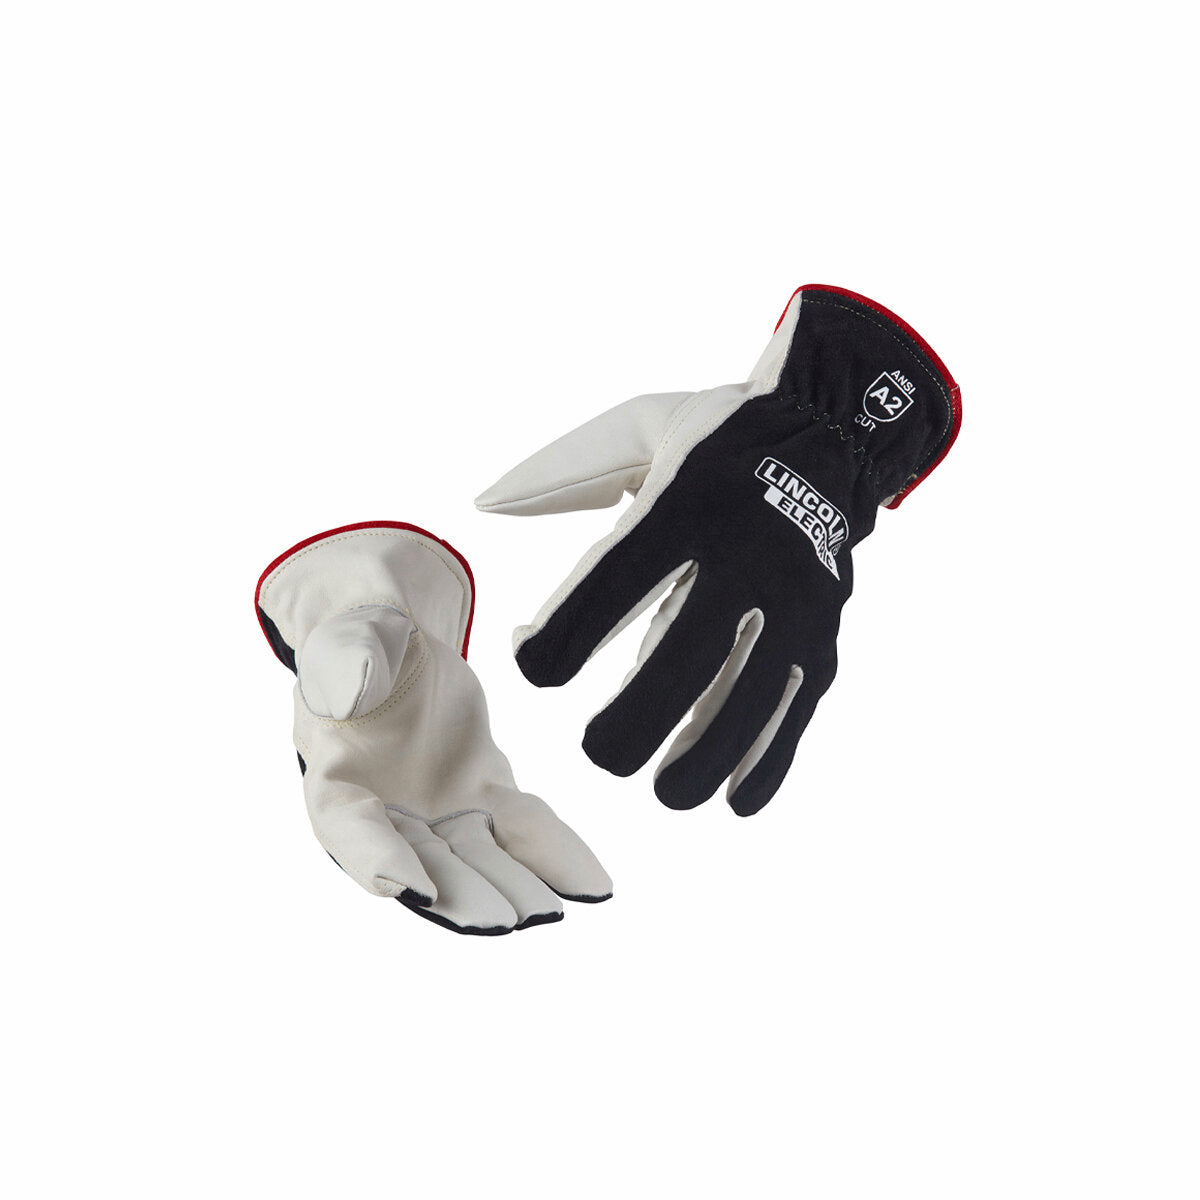 Lincoln Electric K3771-2XL Cut Resistant A2 Leather Drivers Gloves - 2XL